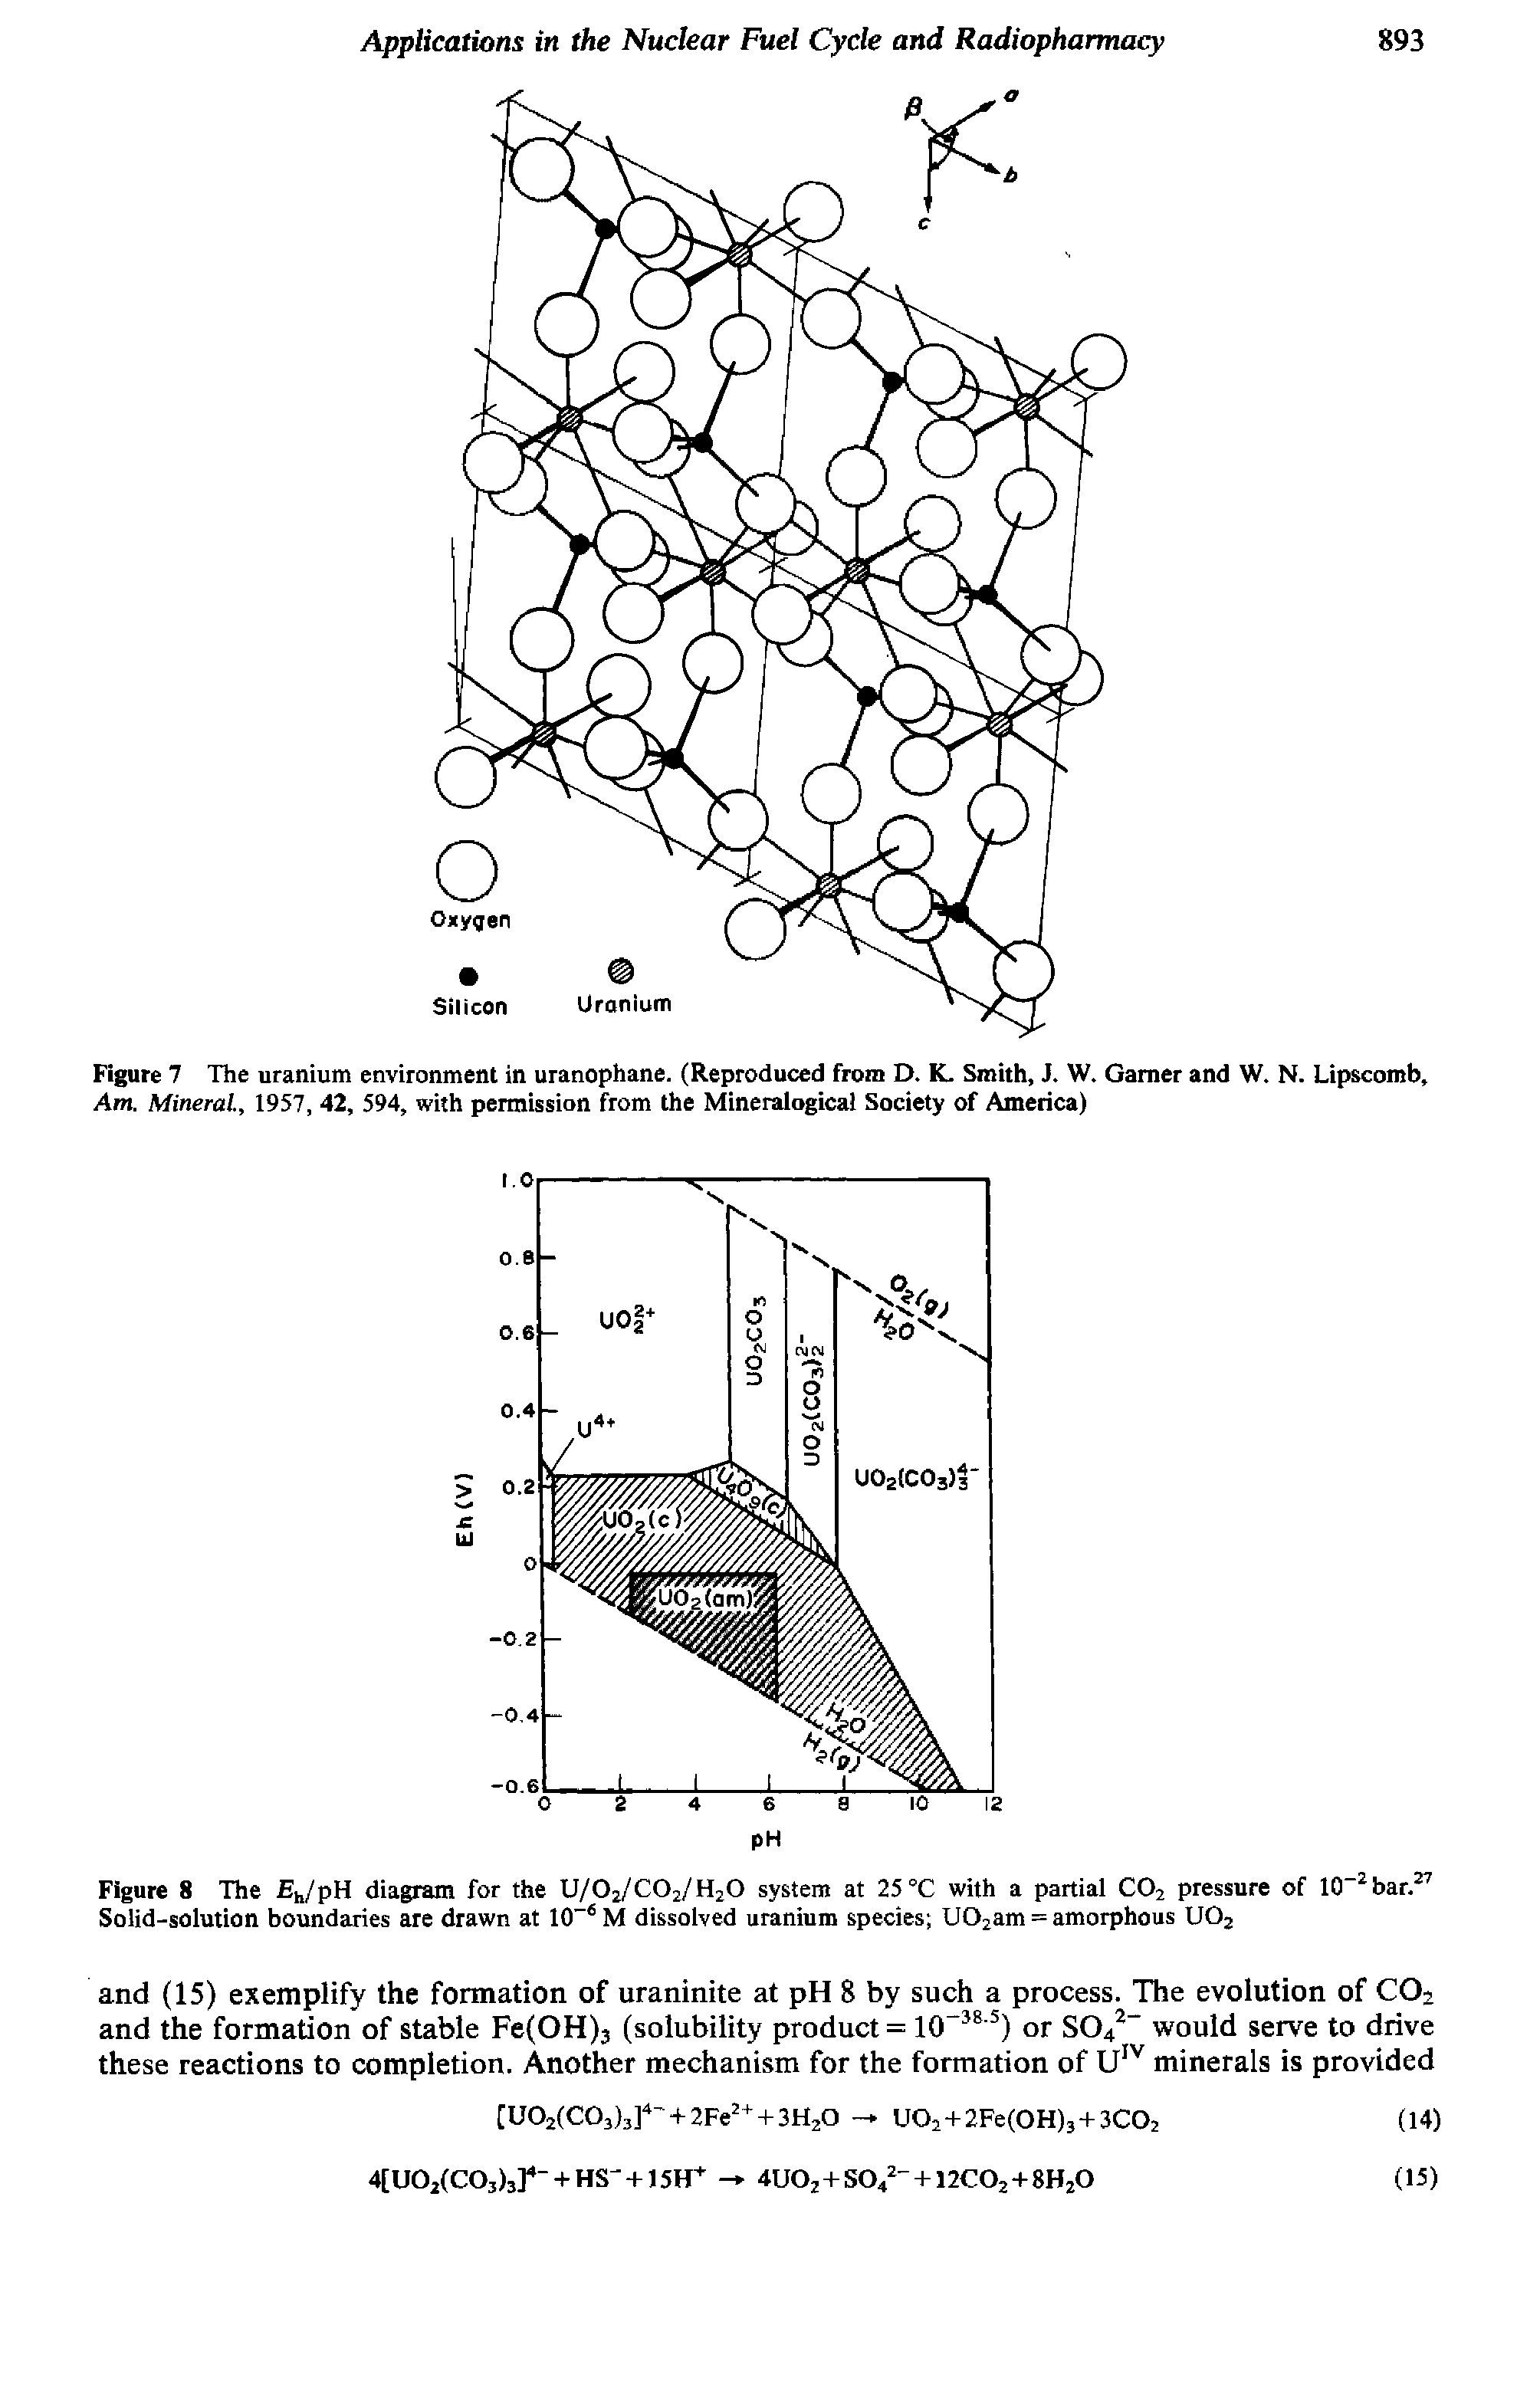 Figure 8 The Eh/pH diagram for the U/02/C02/H20 system at 25 °C with a partial C02 pressure of 10 2bar.27 Solid-solution boundaries are drawn at 10-6 M dissolved uranium species U02am = amorphous U02...